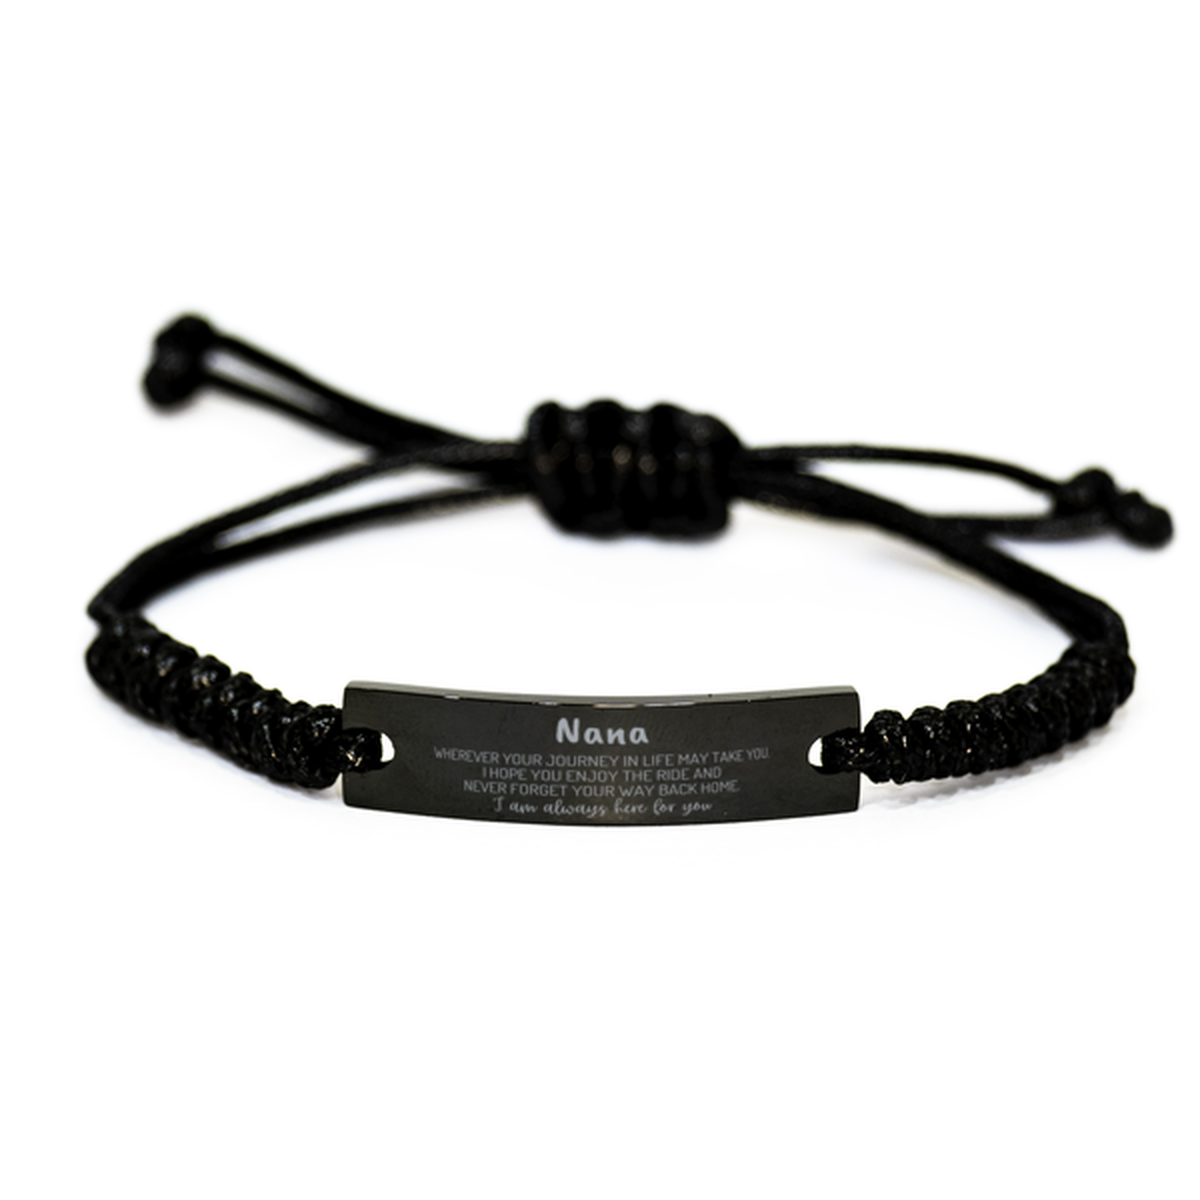 Nana wherever your journey in life may take you, I am always here for you Nana Black Rope Bracelet, Awesome Christmas Gifts For Nana, Nana Birthday Gifts for Men Women Family Loved One